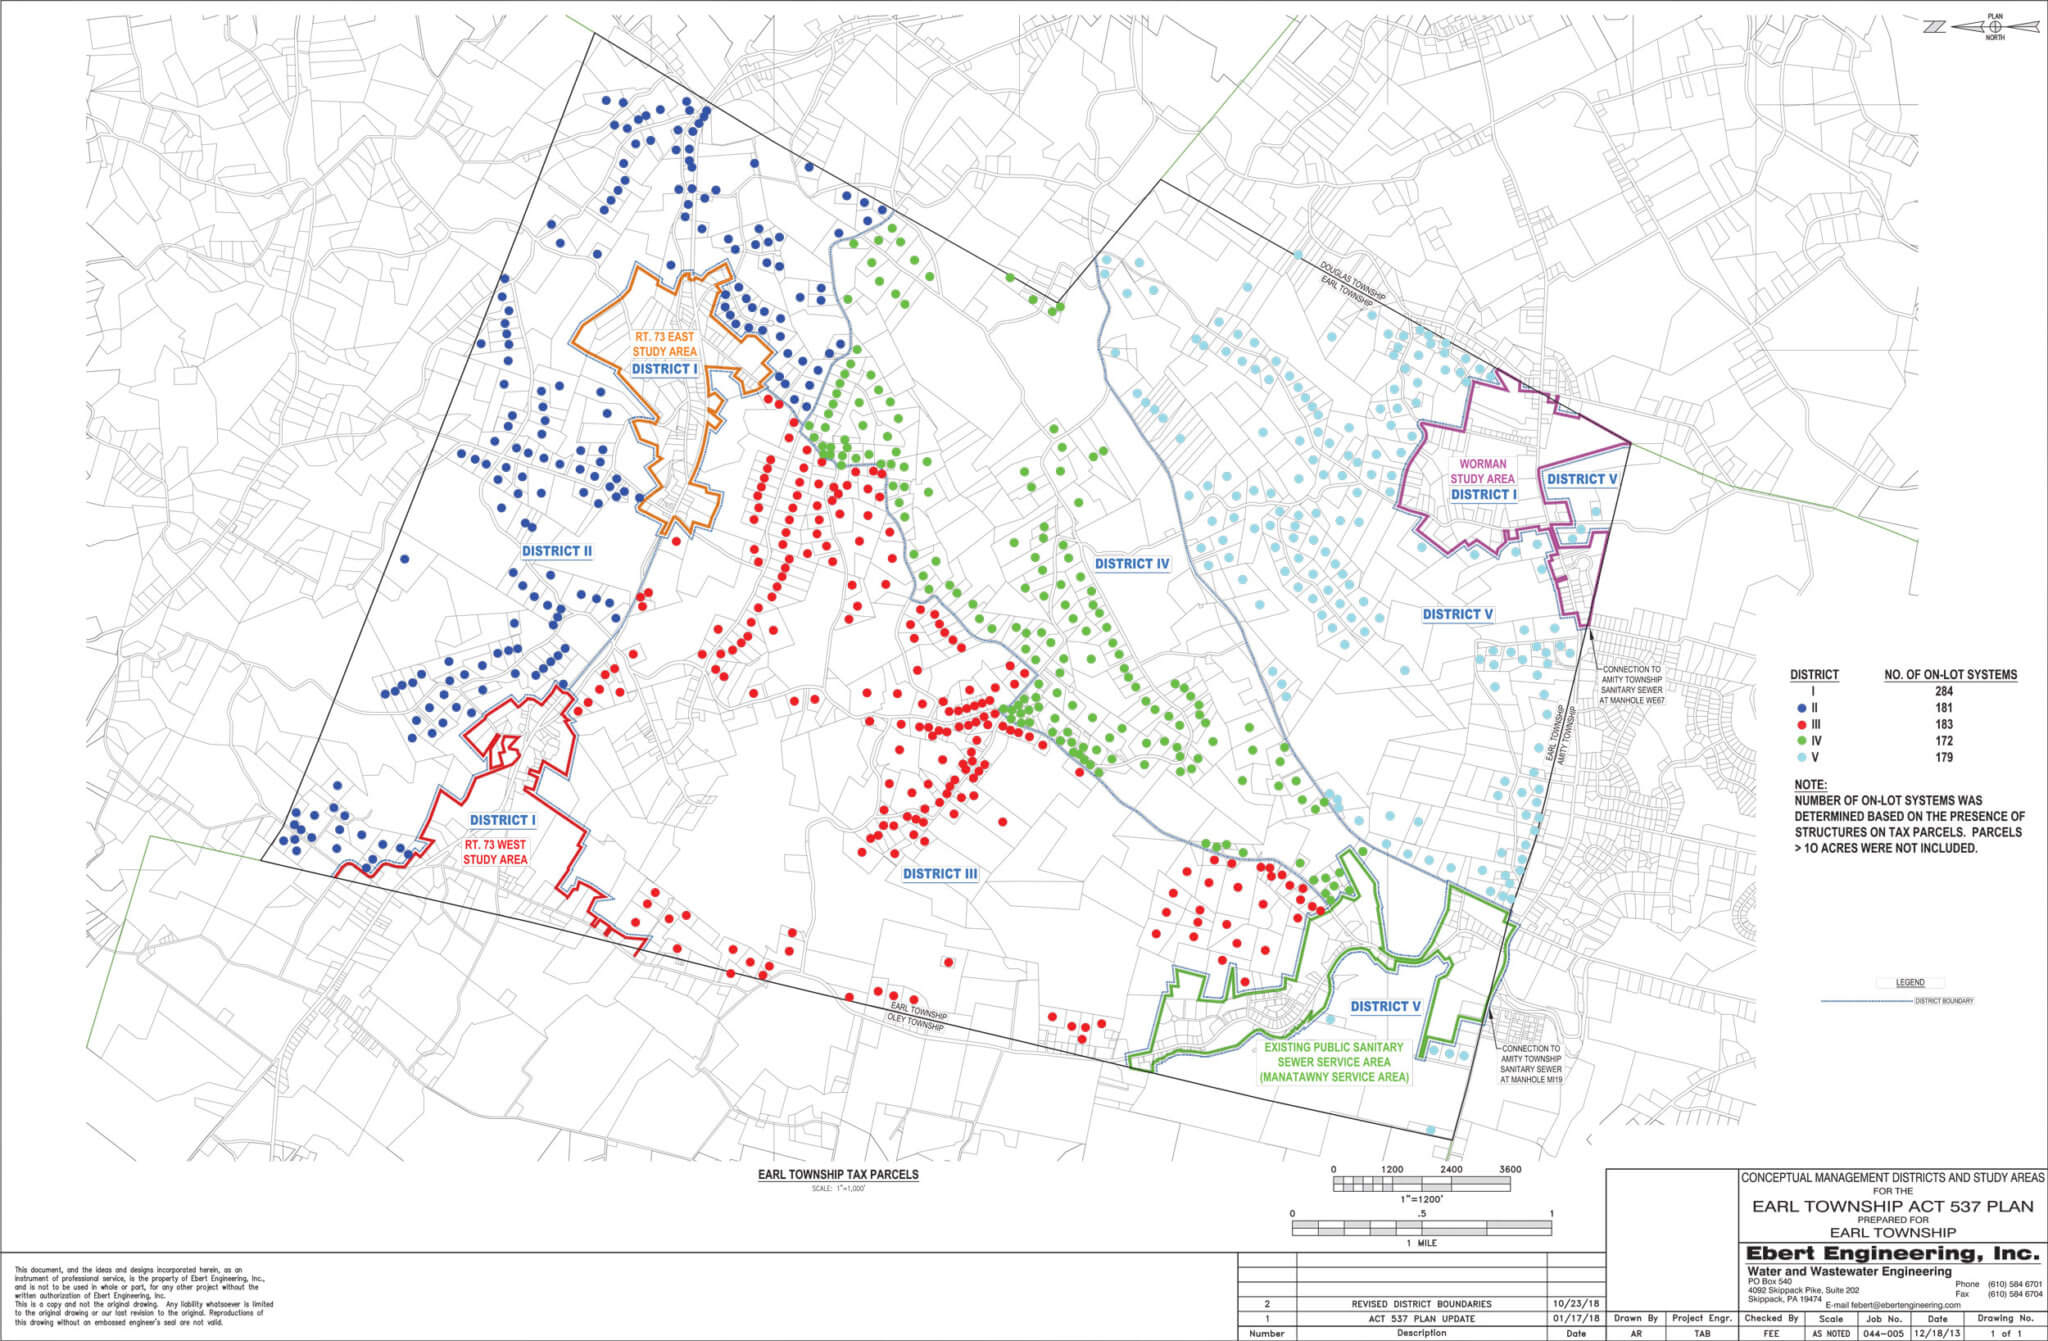 Road And Zoning Maps Of Earl Township In Berks County PA